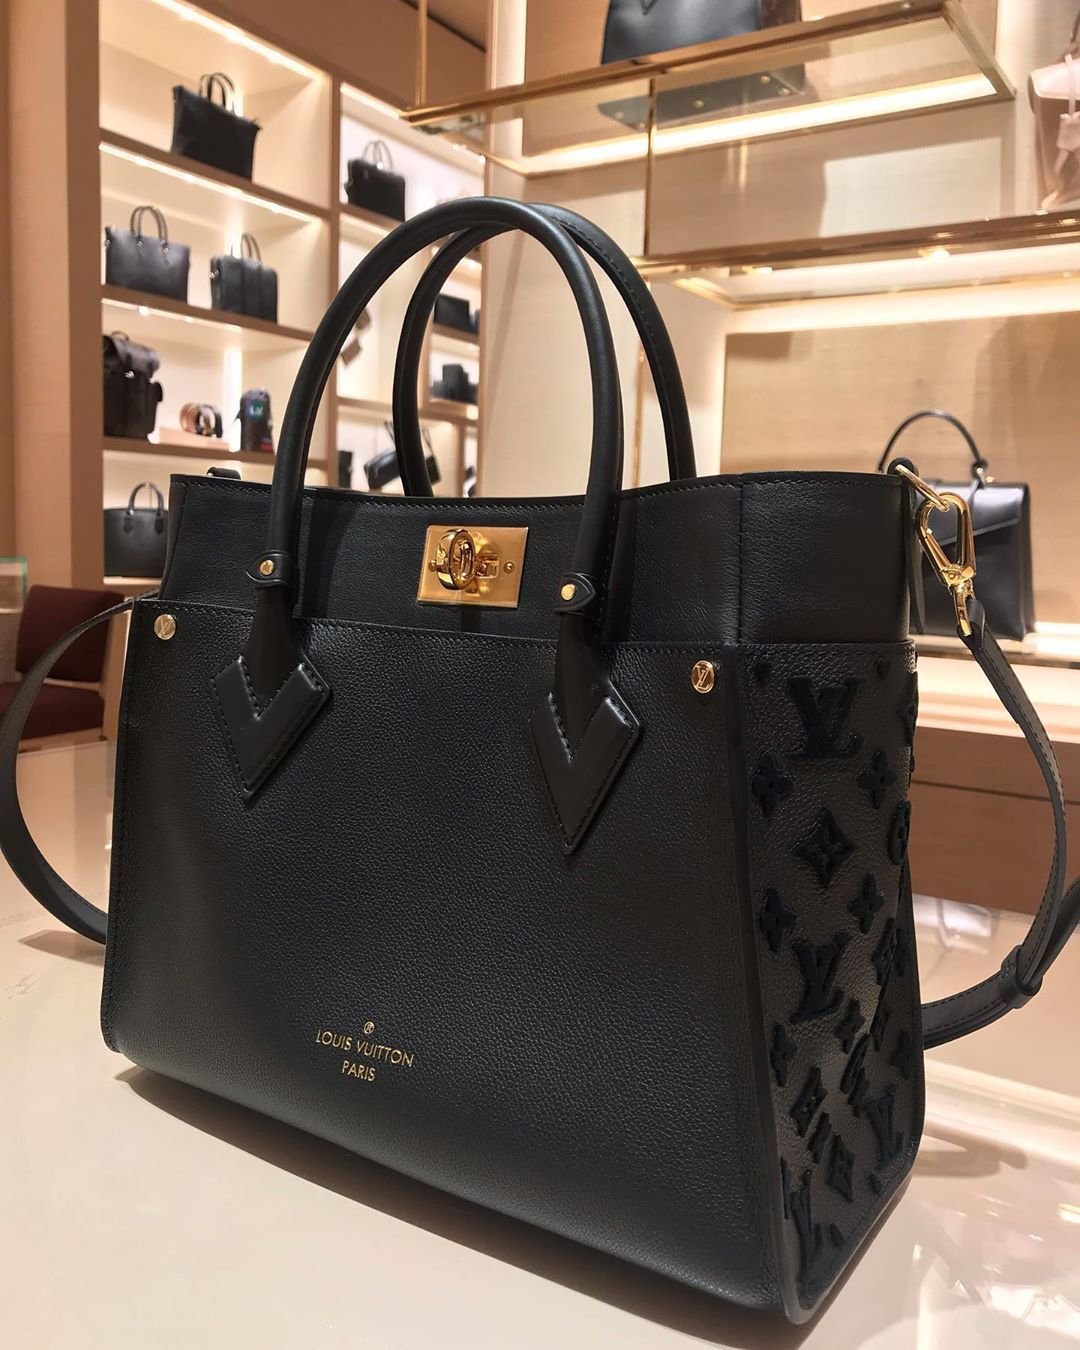 louis vuitton tote with side pockets